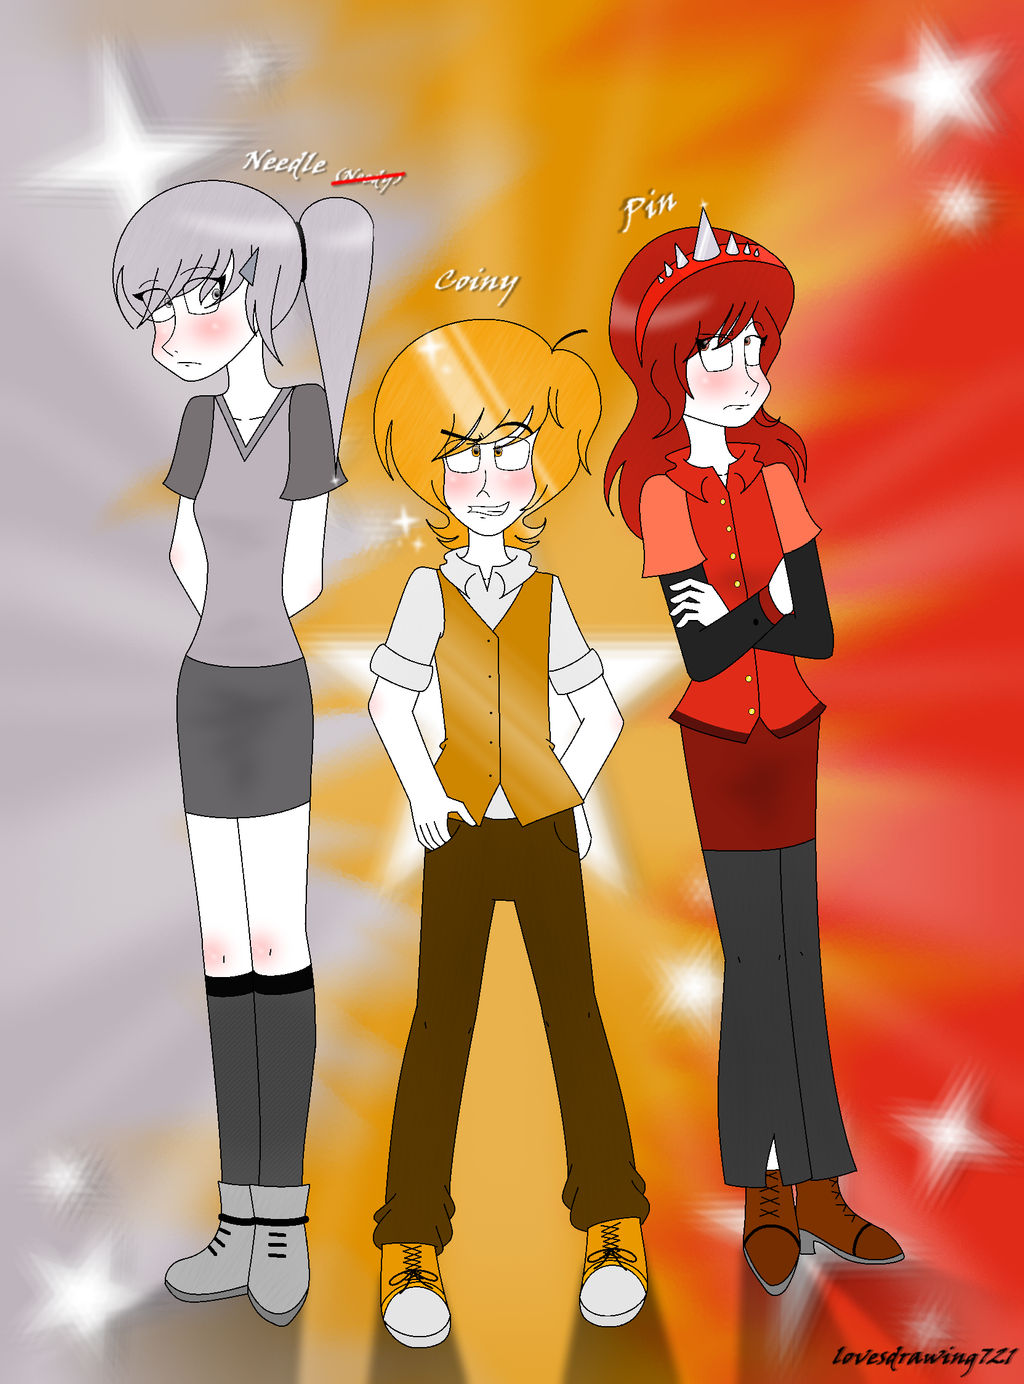 Needle, Coiny and Pin by lovesdrawing721 on DeviantArt